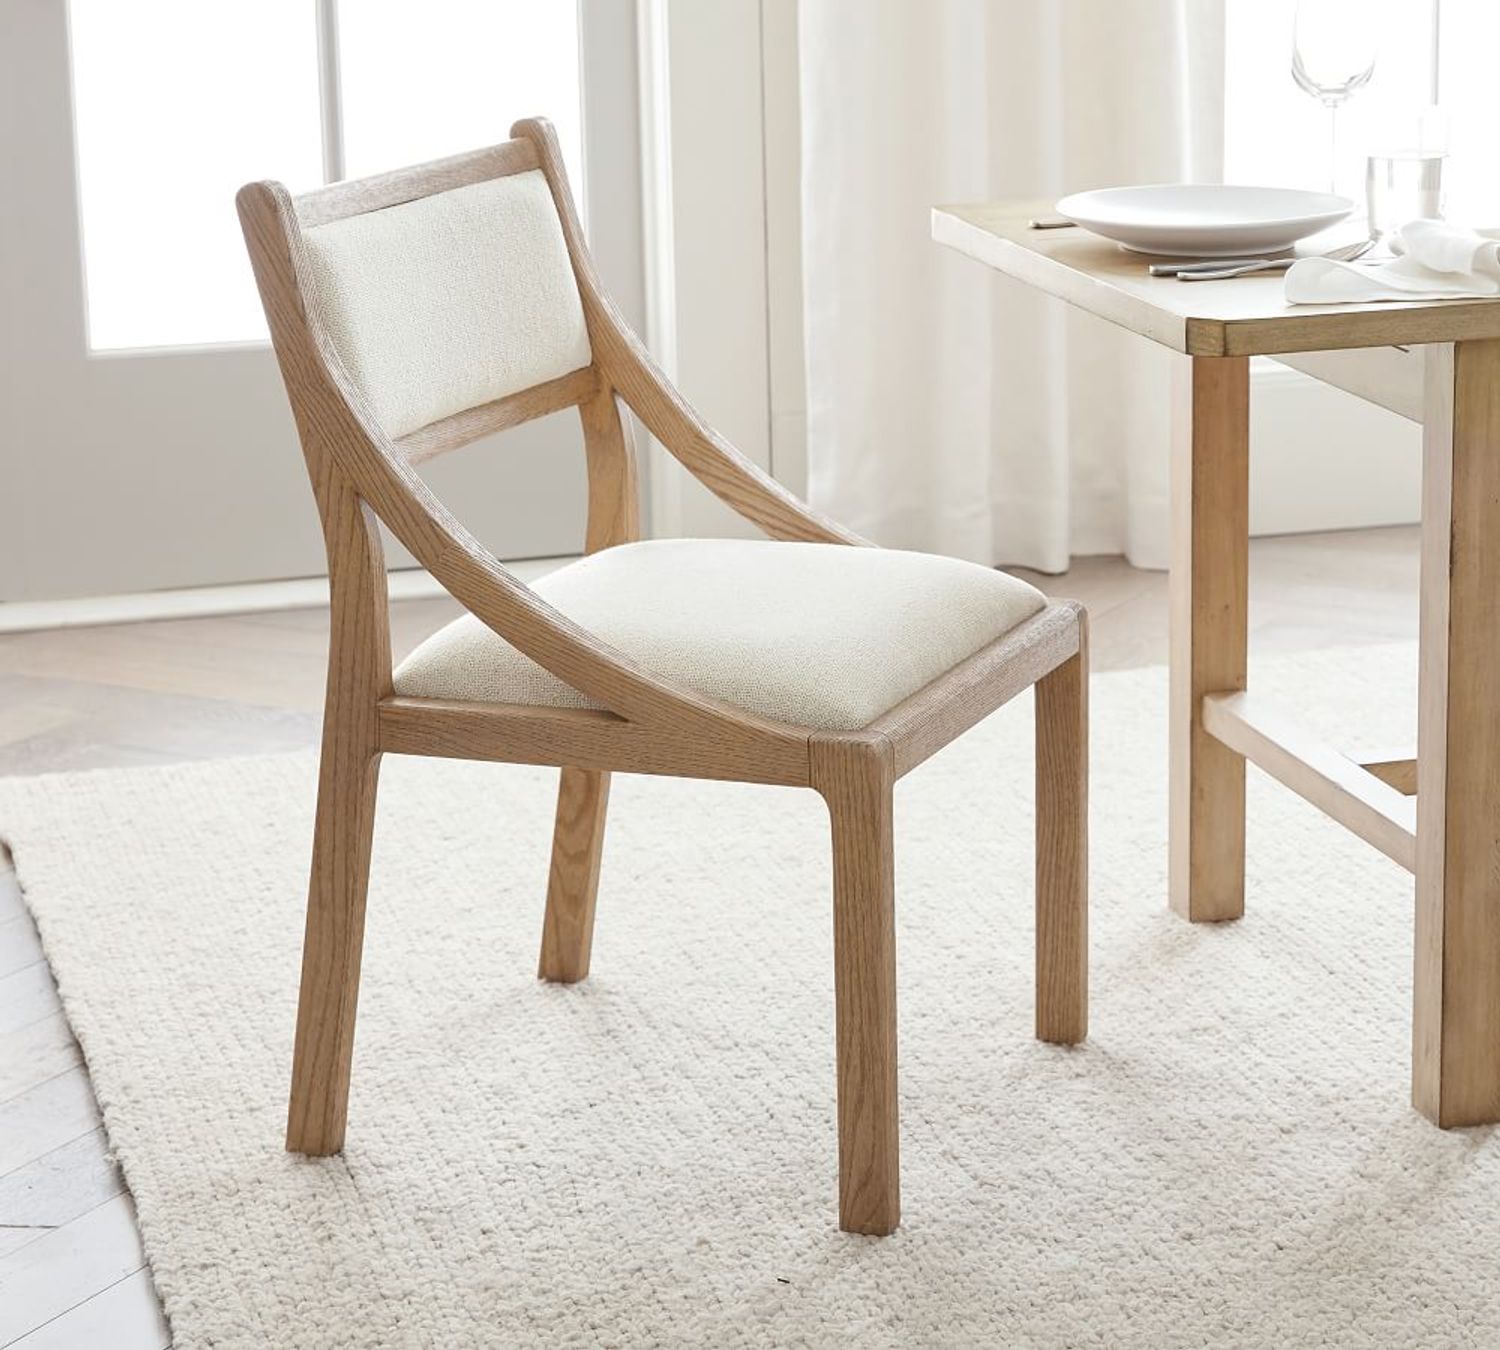 Shop Lyell Upholstered Dining Chairs from Pottery Barn on Openhaus